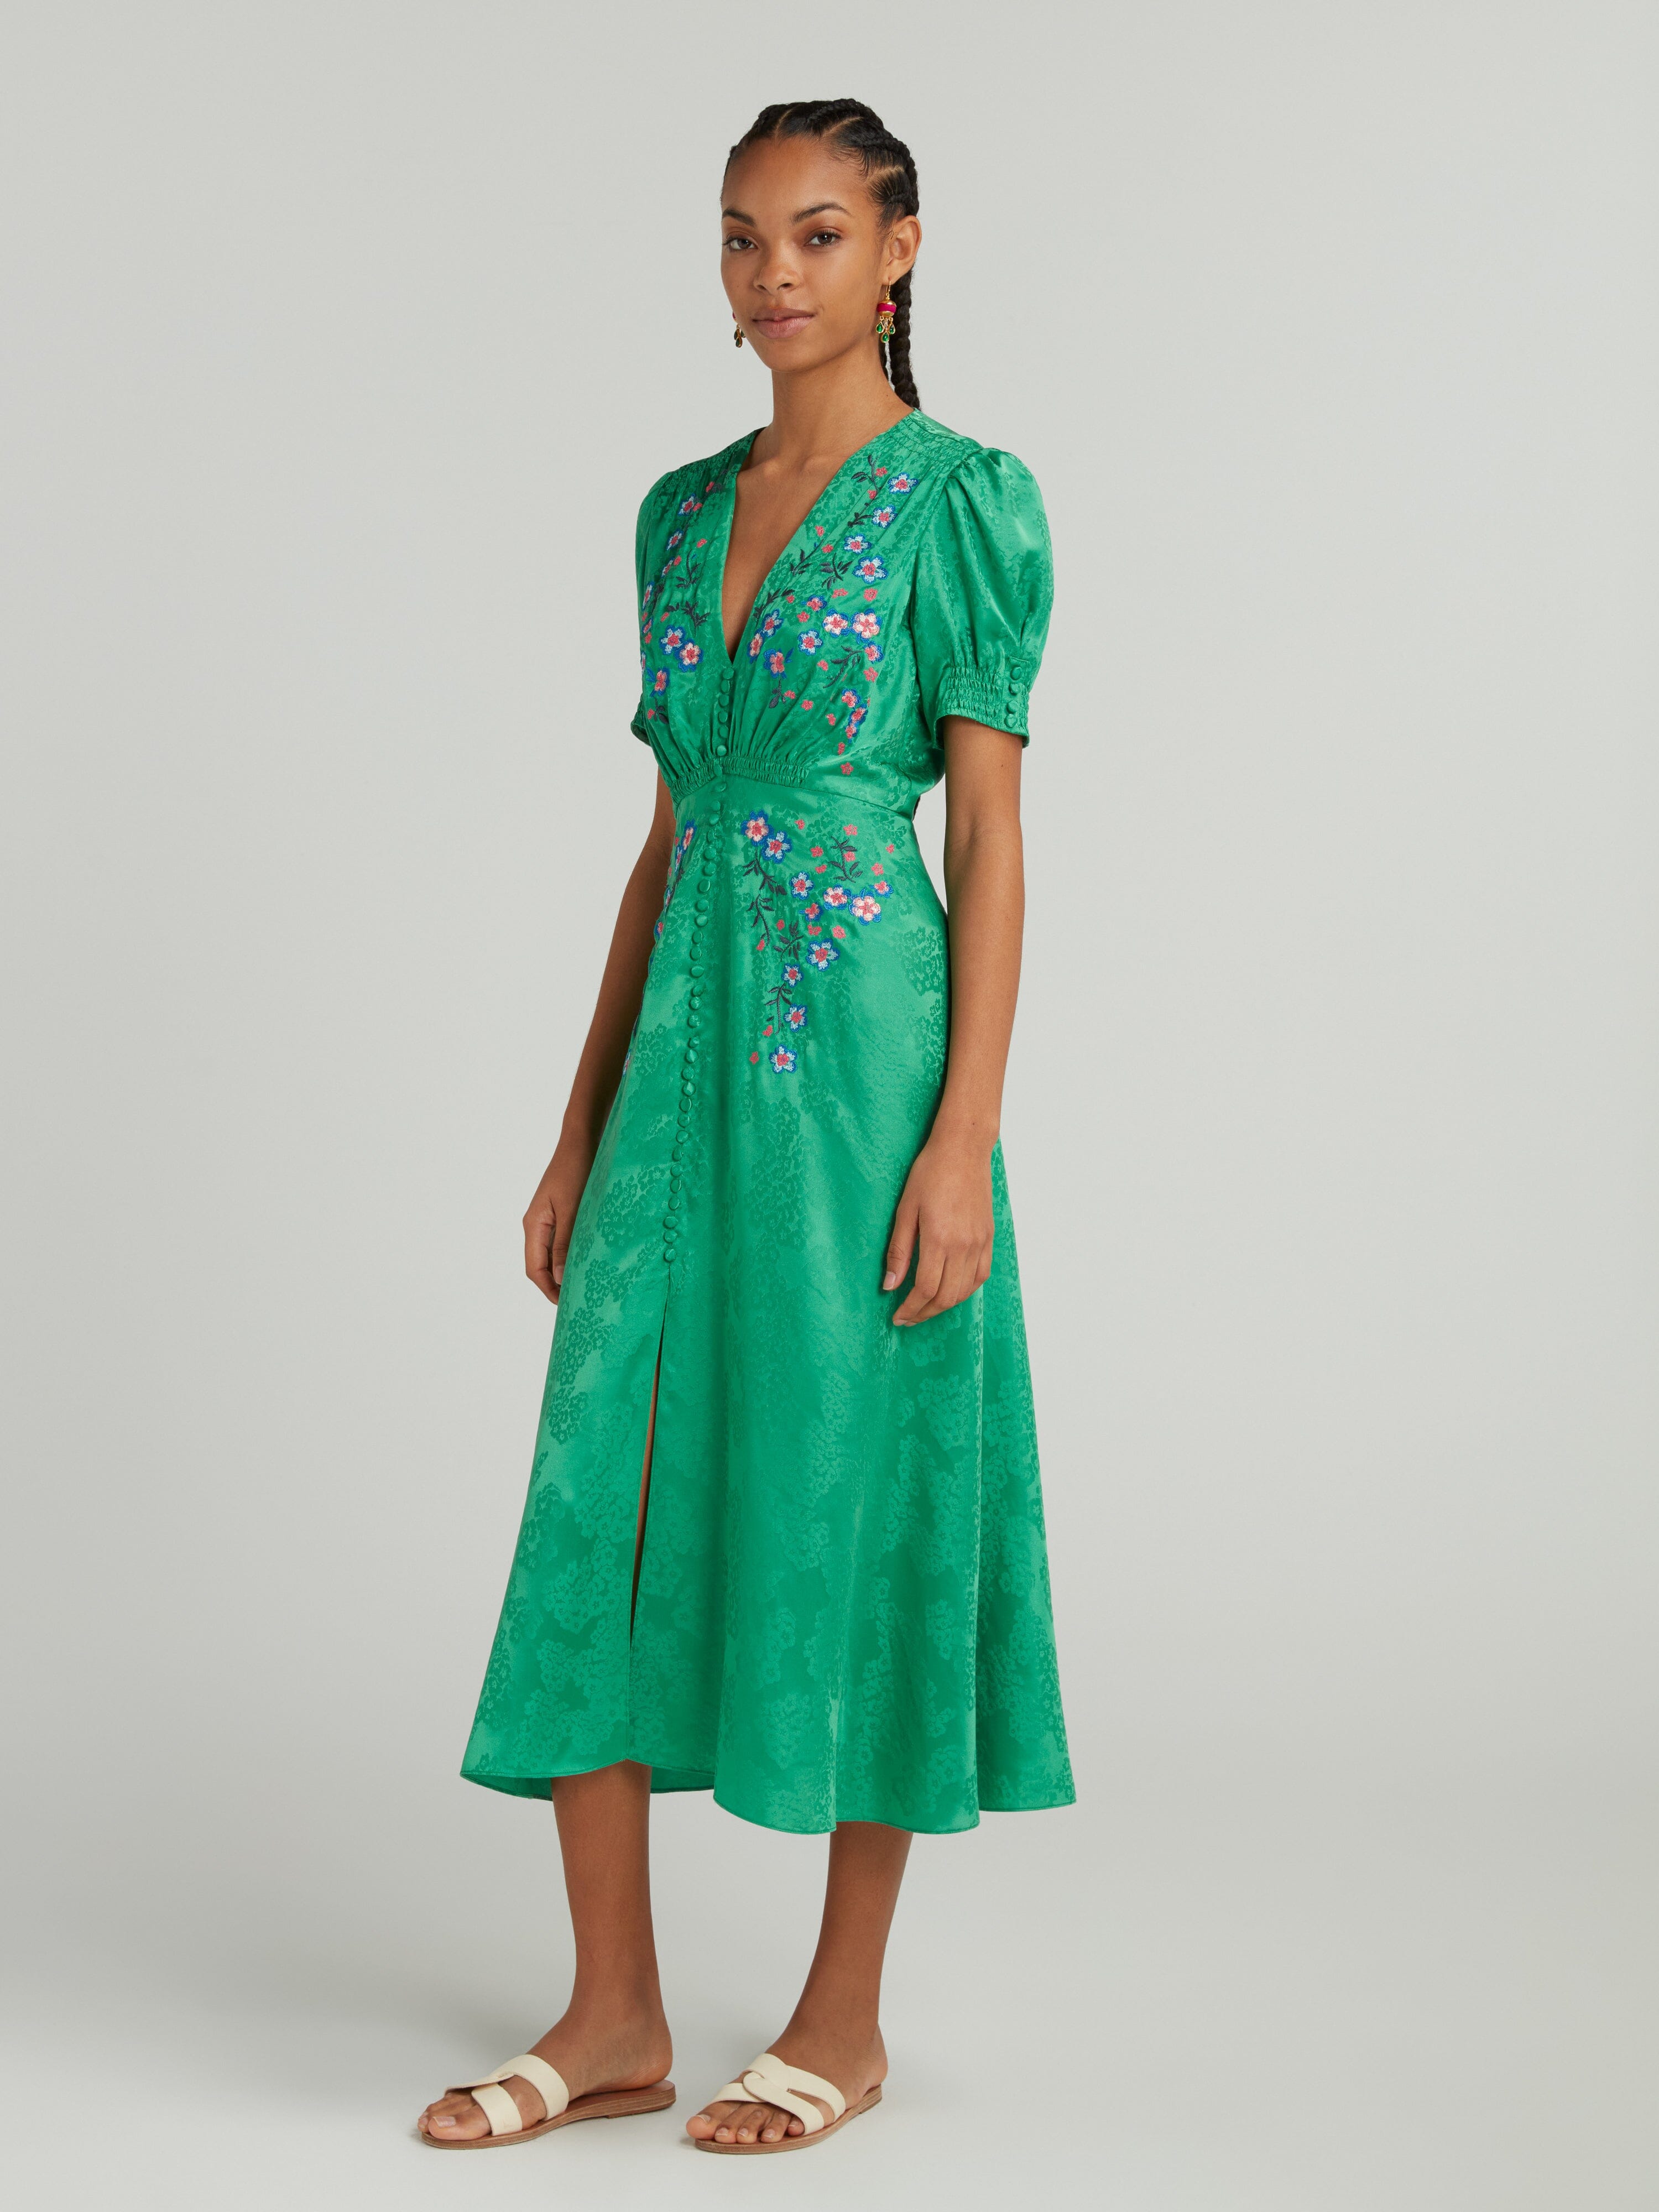 Lea Dress in Kelly Green Embroidered